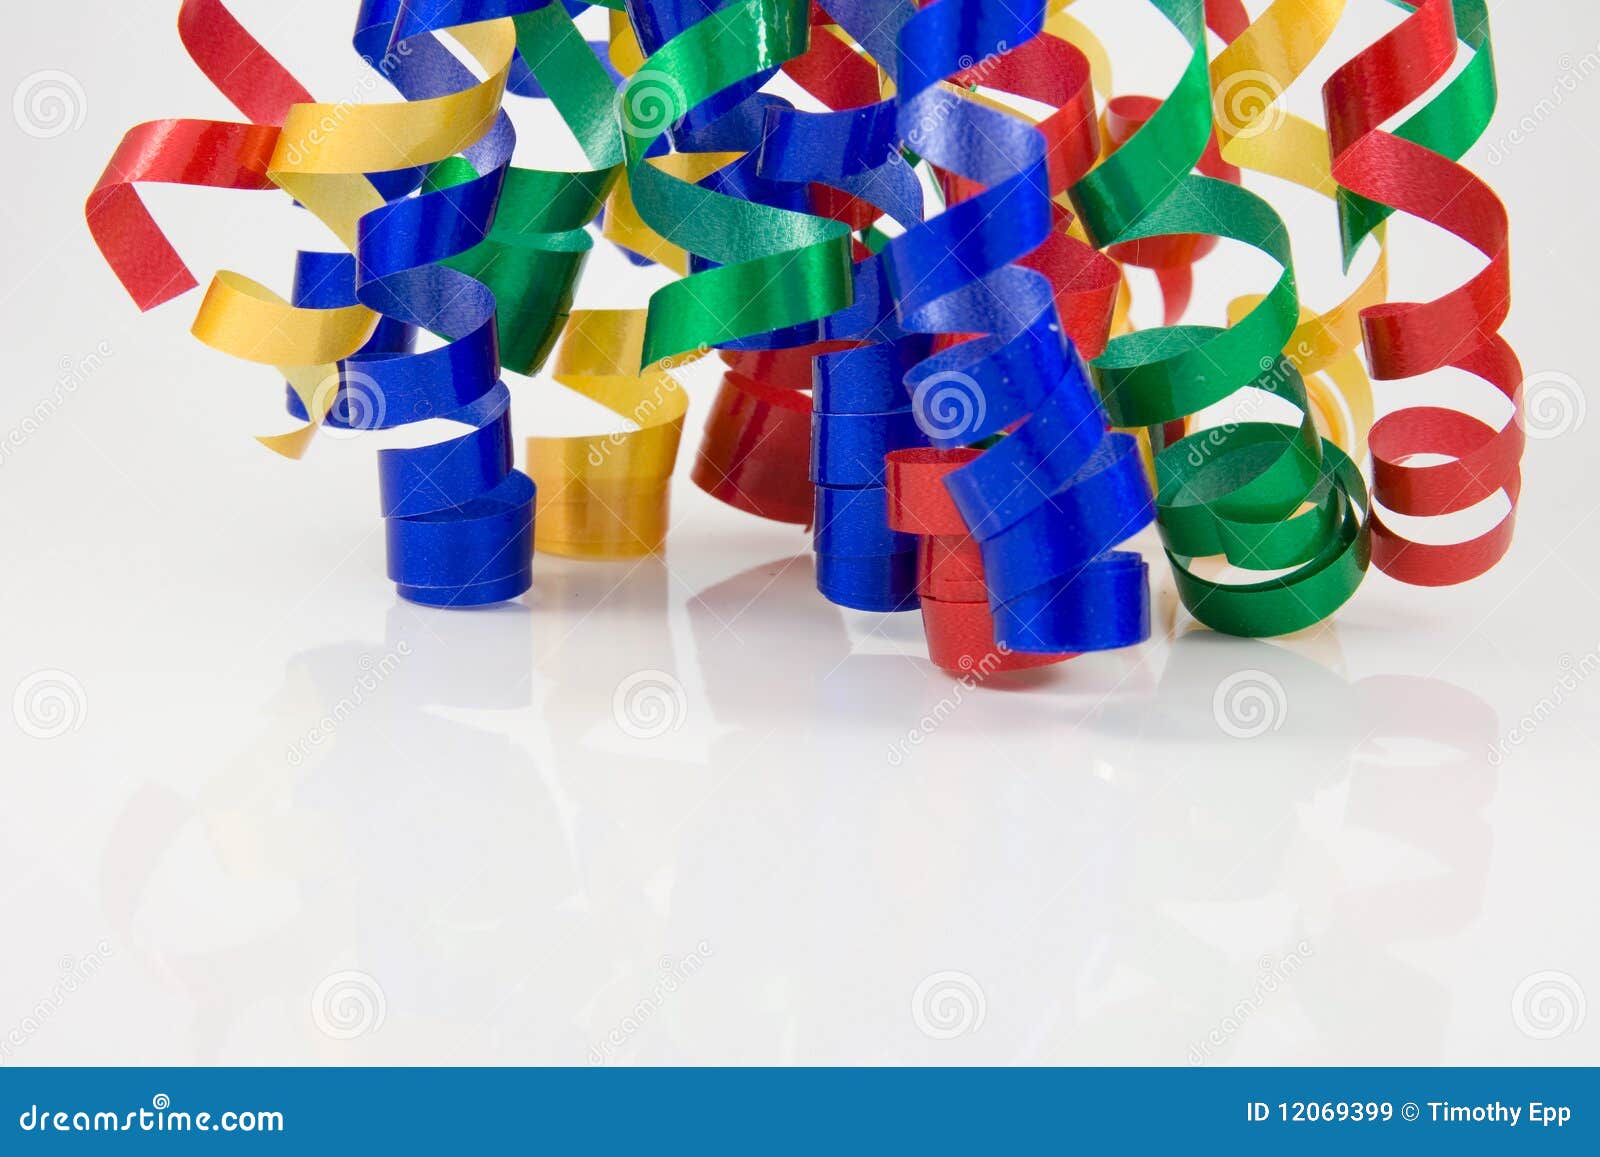 Party Ribbons Stock Image Image Of Background Christmas 12069399